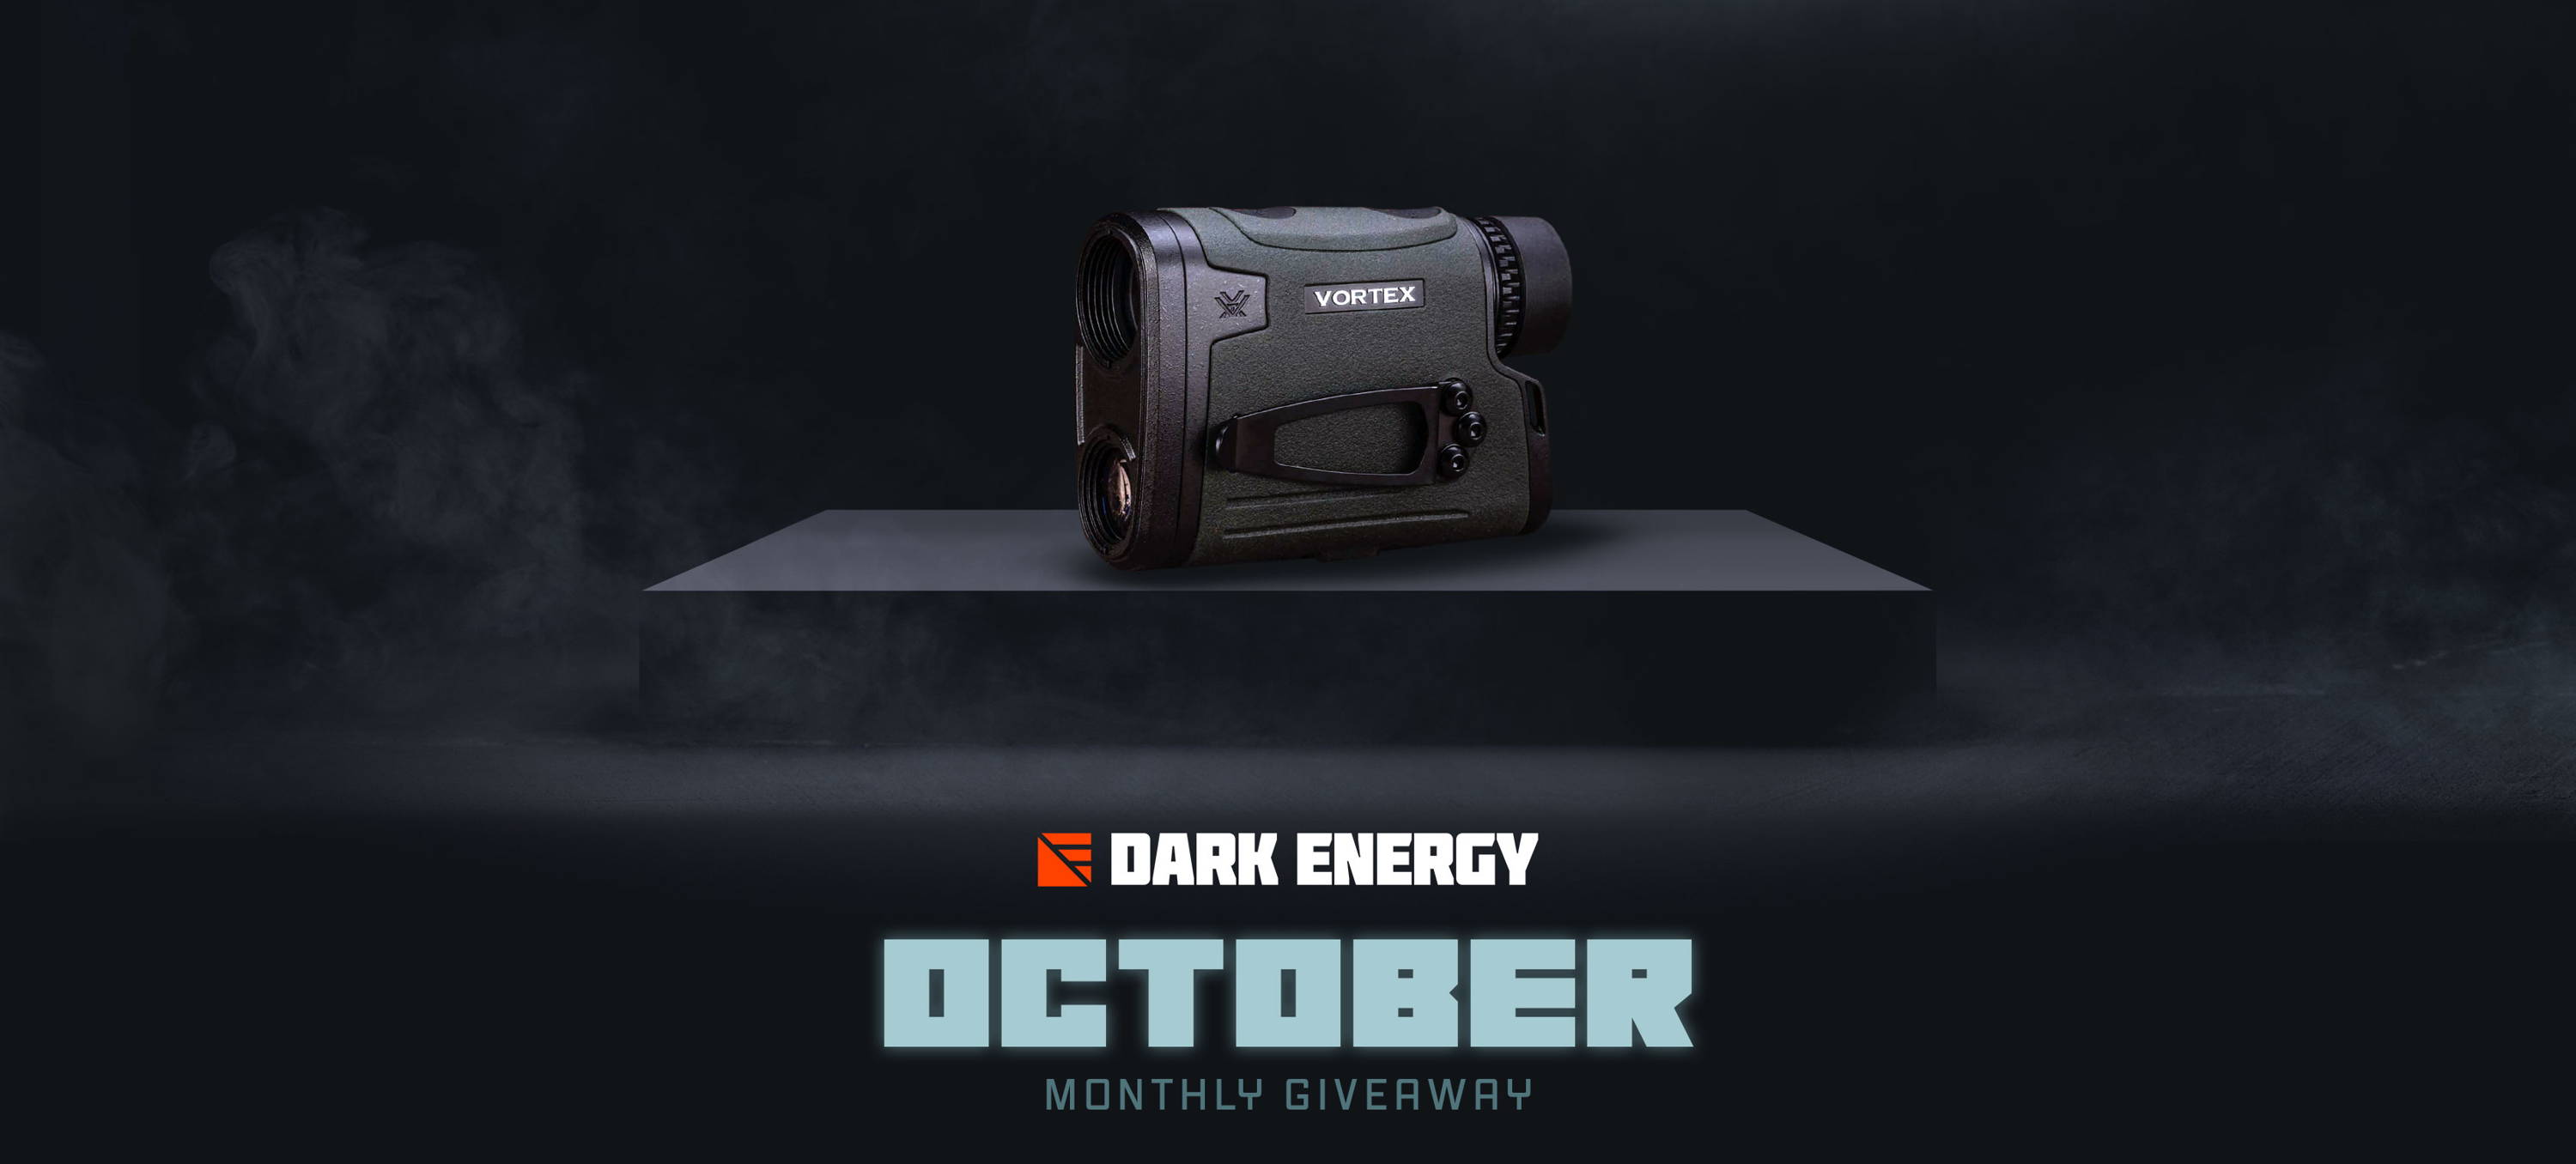 It's time for the Dark Energy October Giveaway!